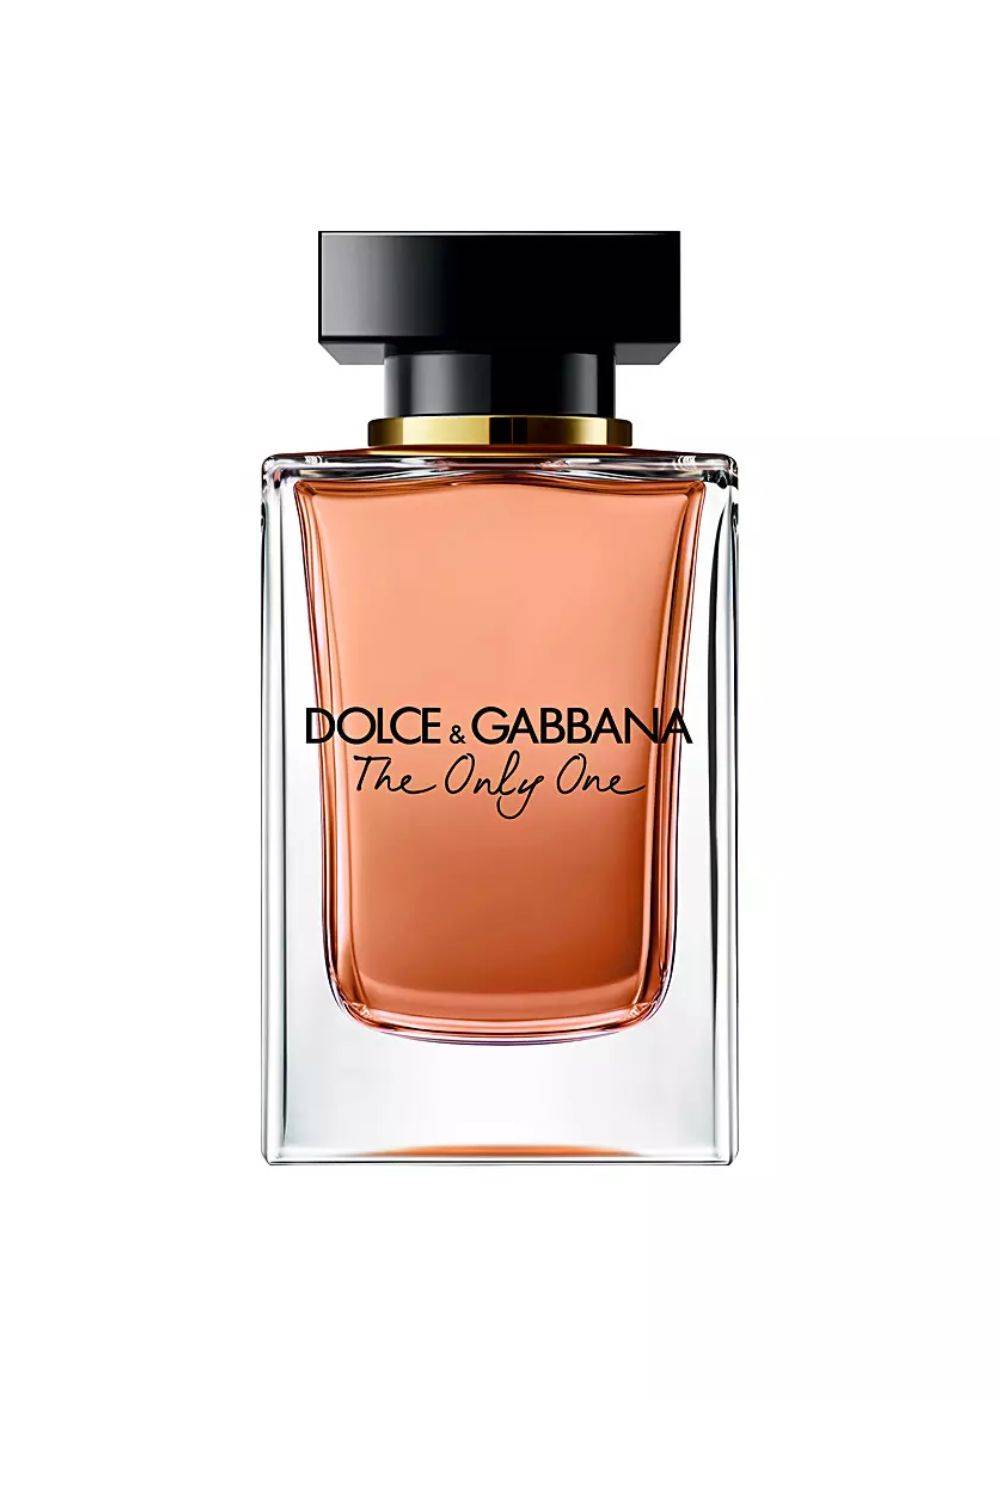 THE ONLY ONE de Dolce & Gabbana 